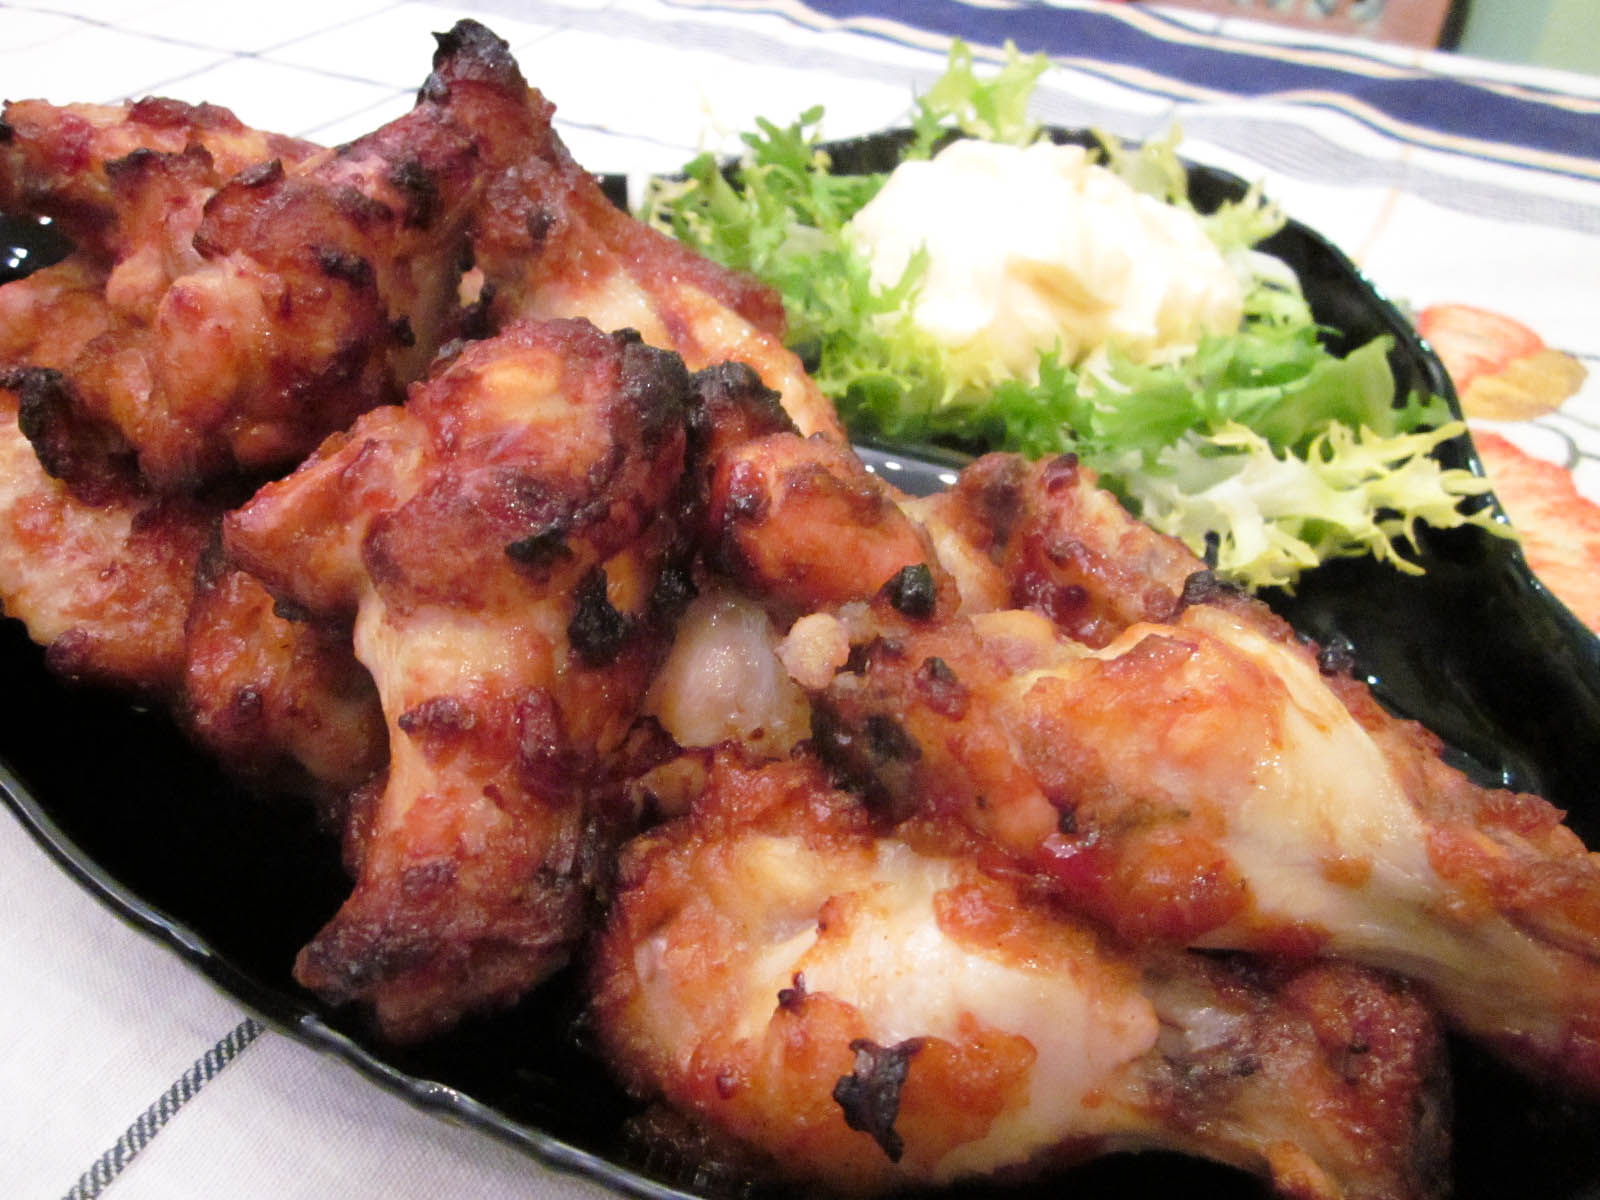 278883724036771289003862232709 Red hot Thai sauce chicken wings - 19979372023375638622329052600929702 - DolceSalato  Tomato ¬ R ‰¬  